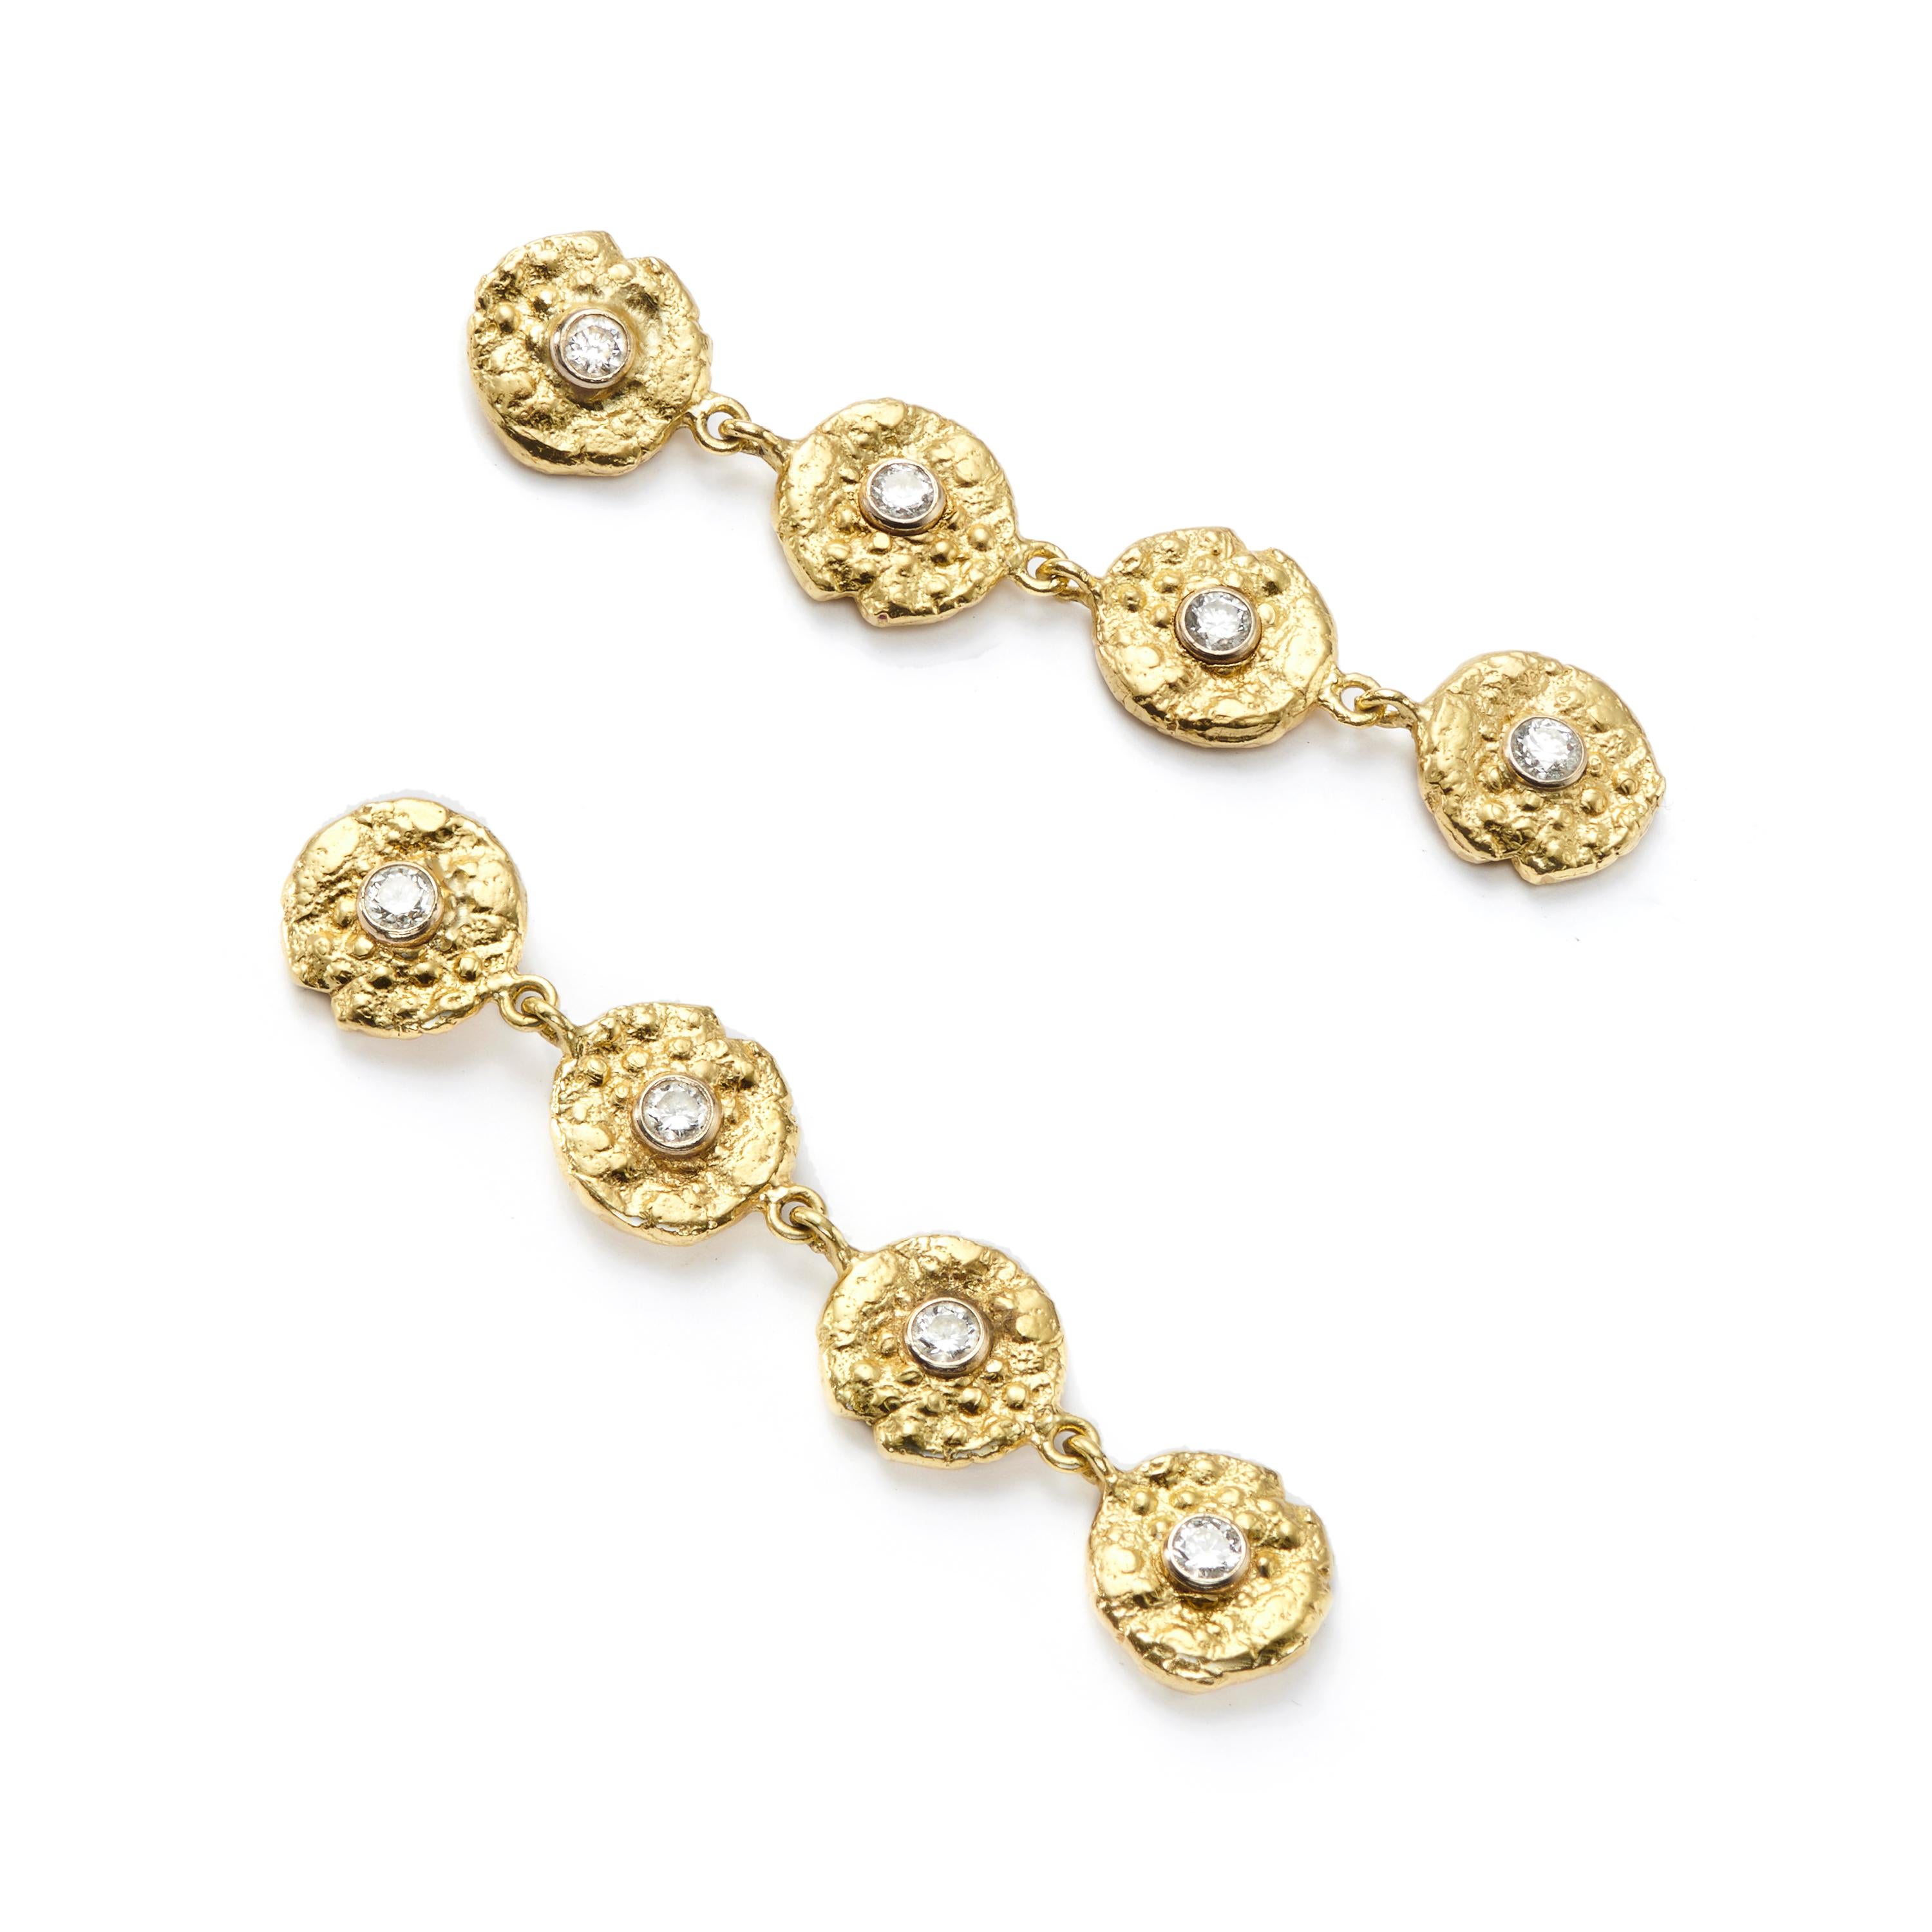 These 18 Karat Gold sea-inspired earrings, set with Diamonds, can be dressed up or down for any occasion. Perfect for day and night.

Diamonds: 0.60 Carat